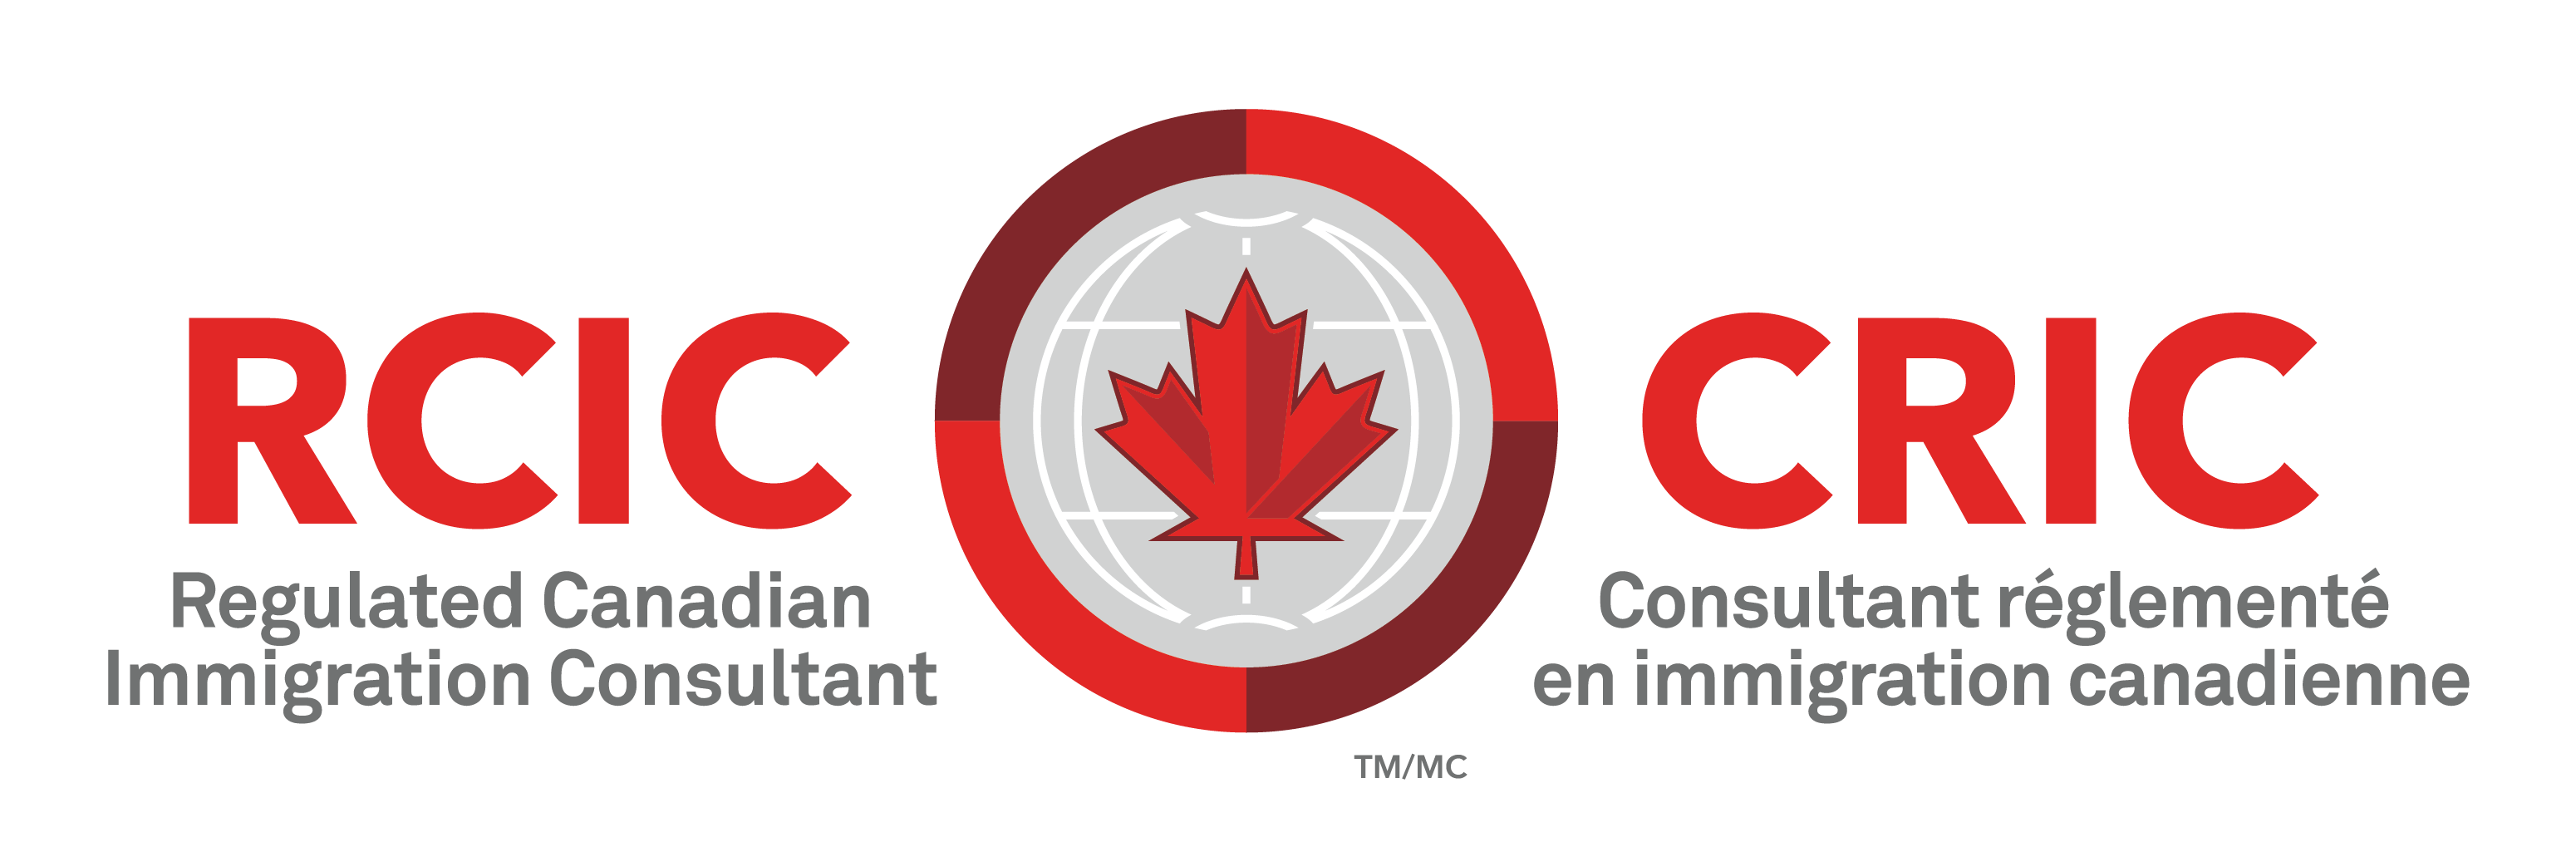 What is a Regulated Canadian Immigration Consultant (RCIC)?